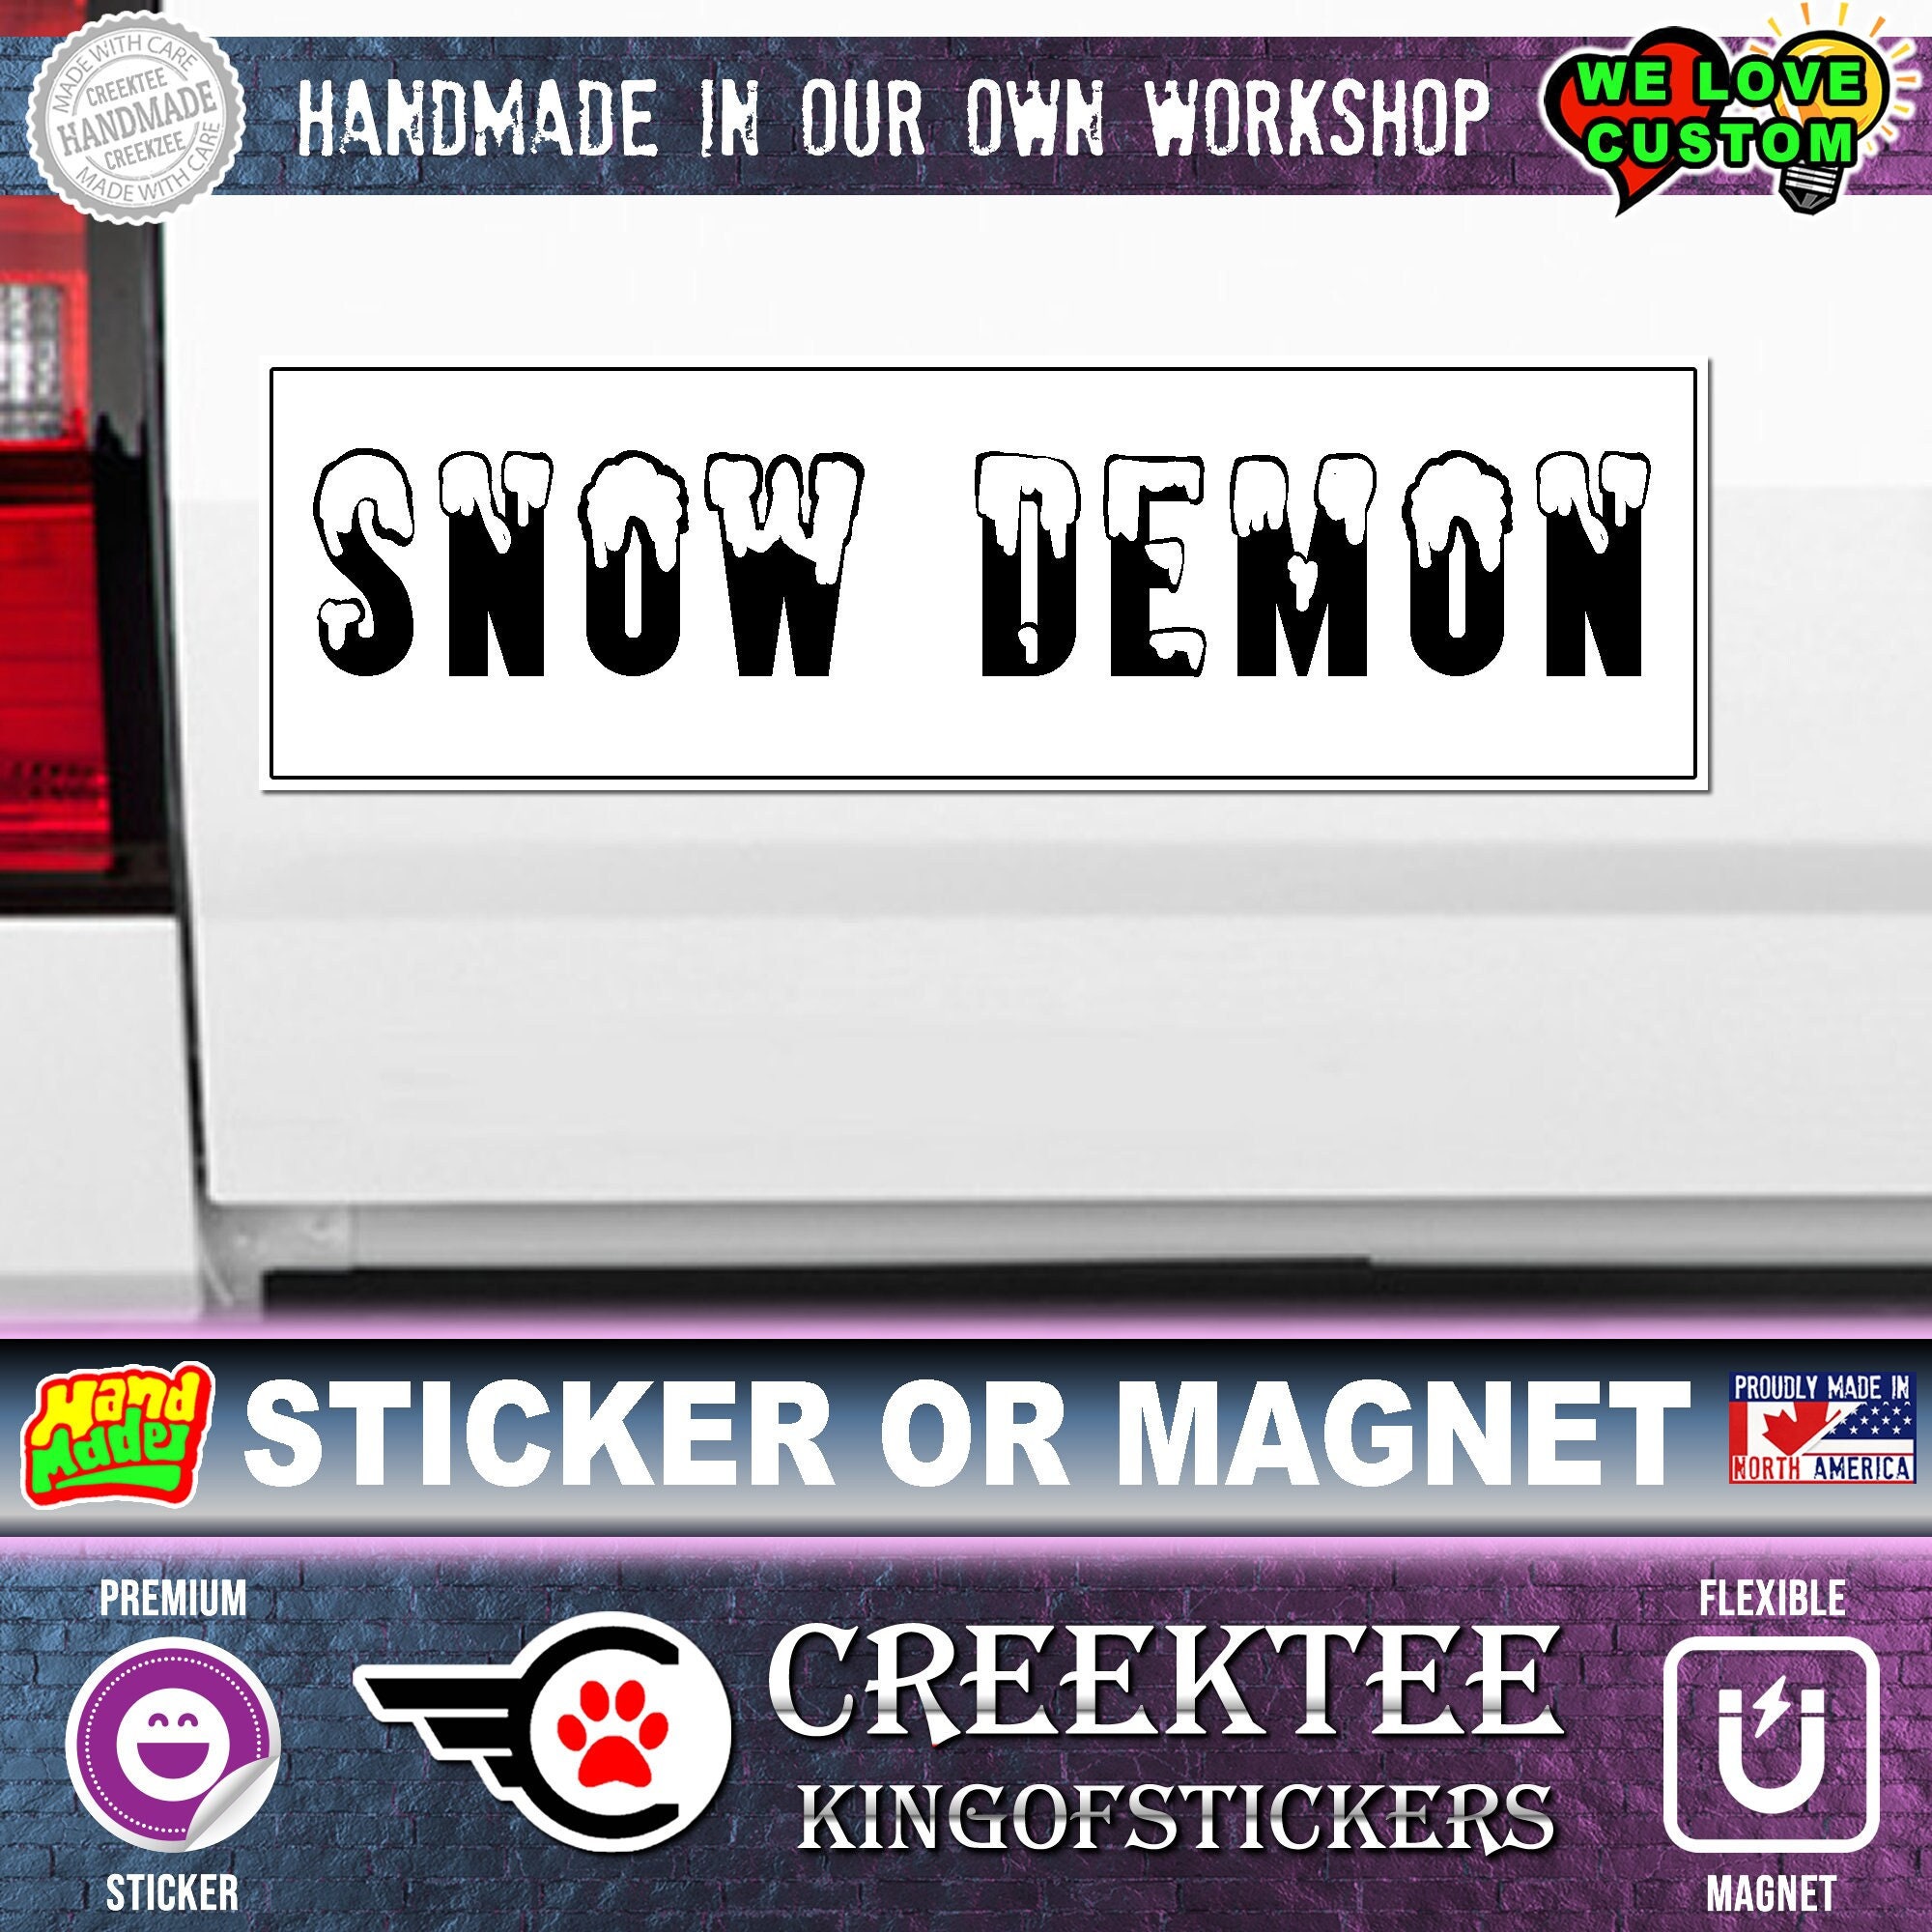 Snow Demon bumper sticker or magnet. Various sizes from 4 inch to 10 inch wide.  Fully customizable. UV Protection. Strong Hold.